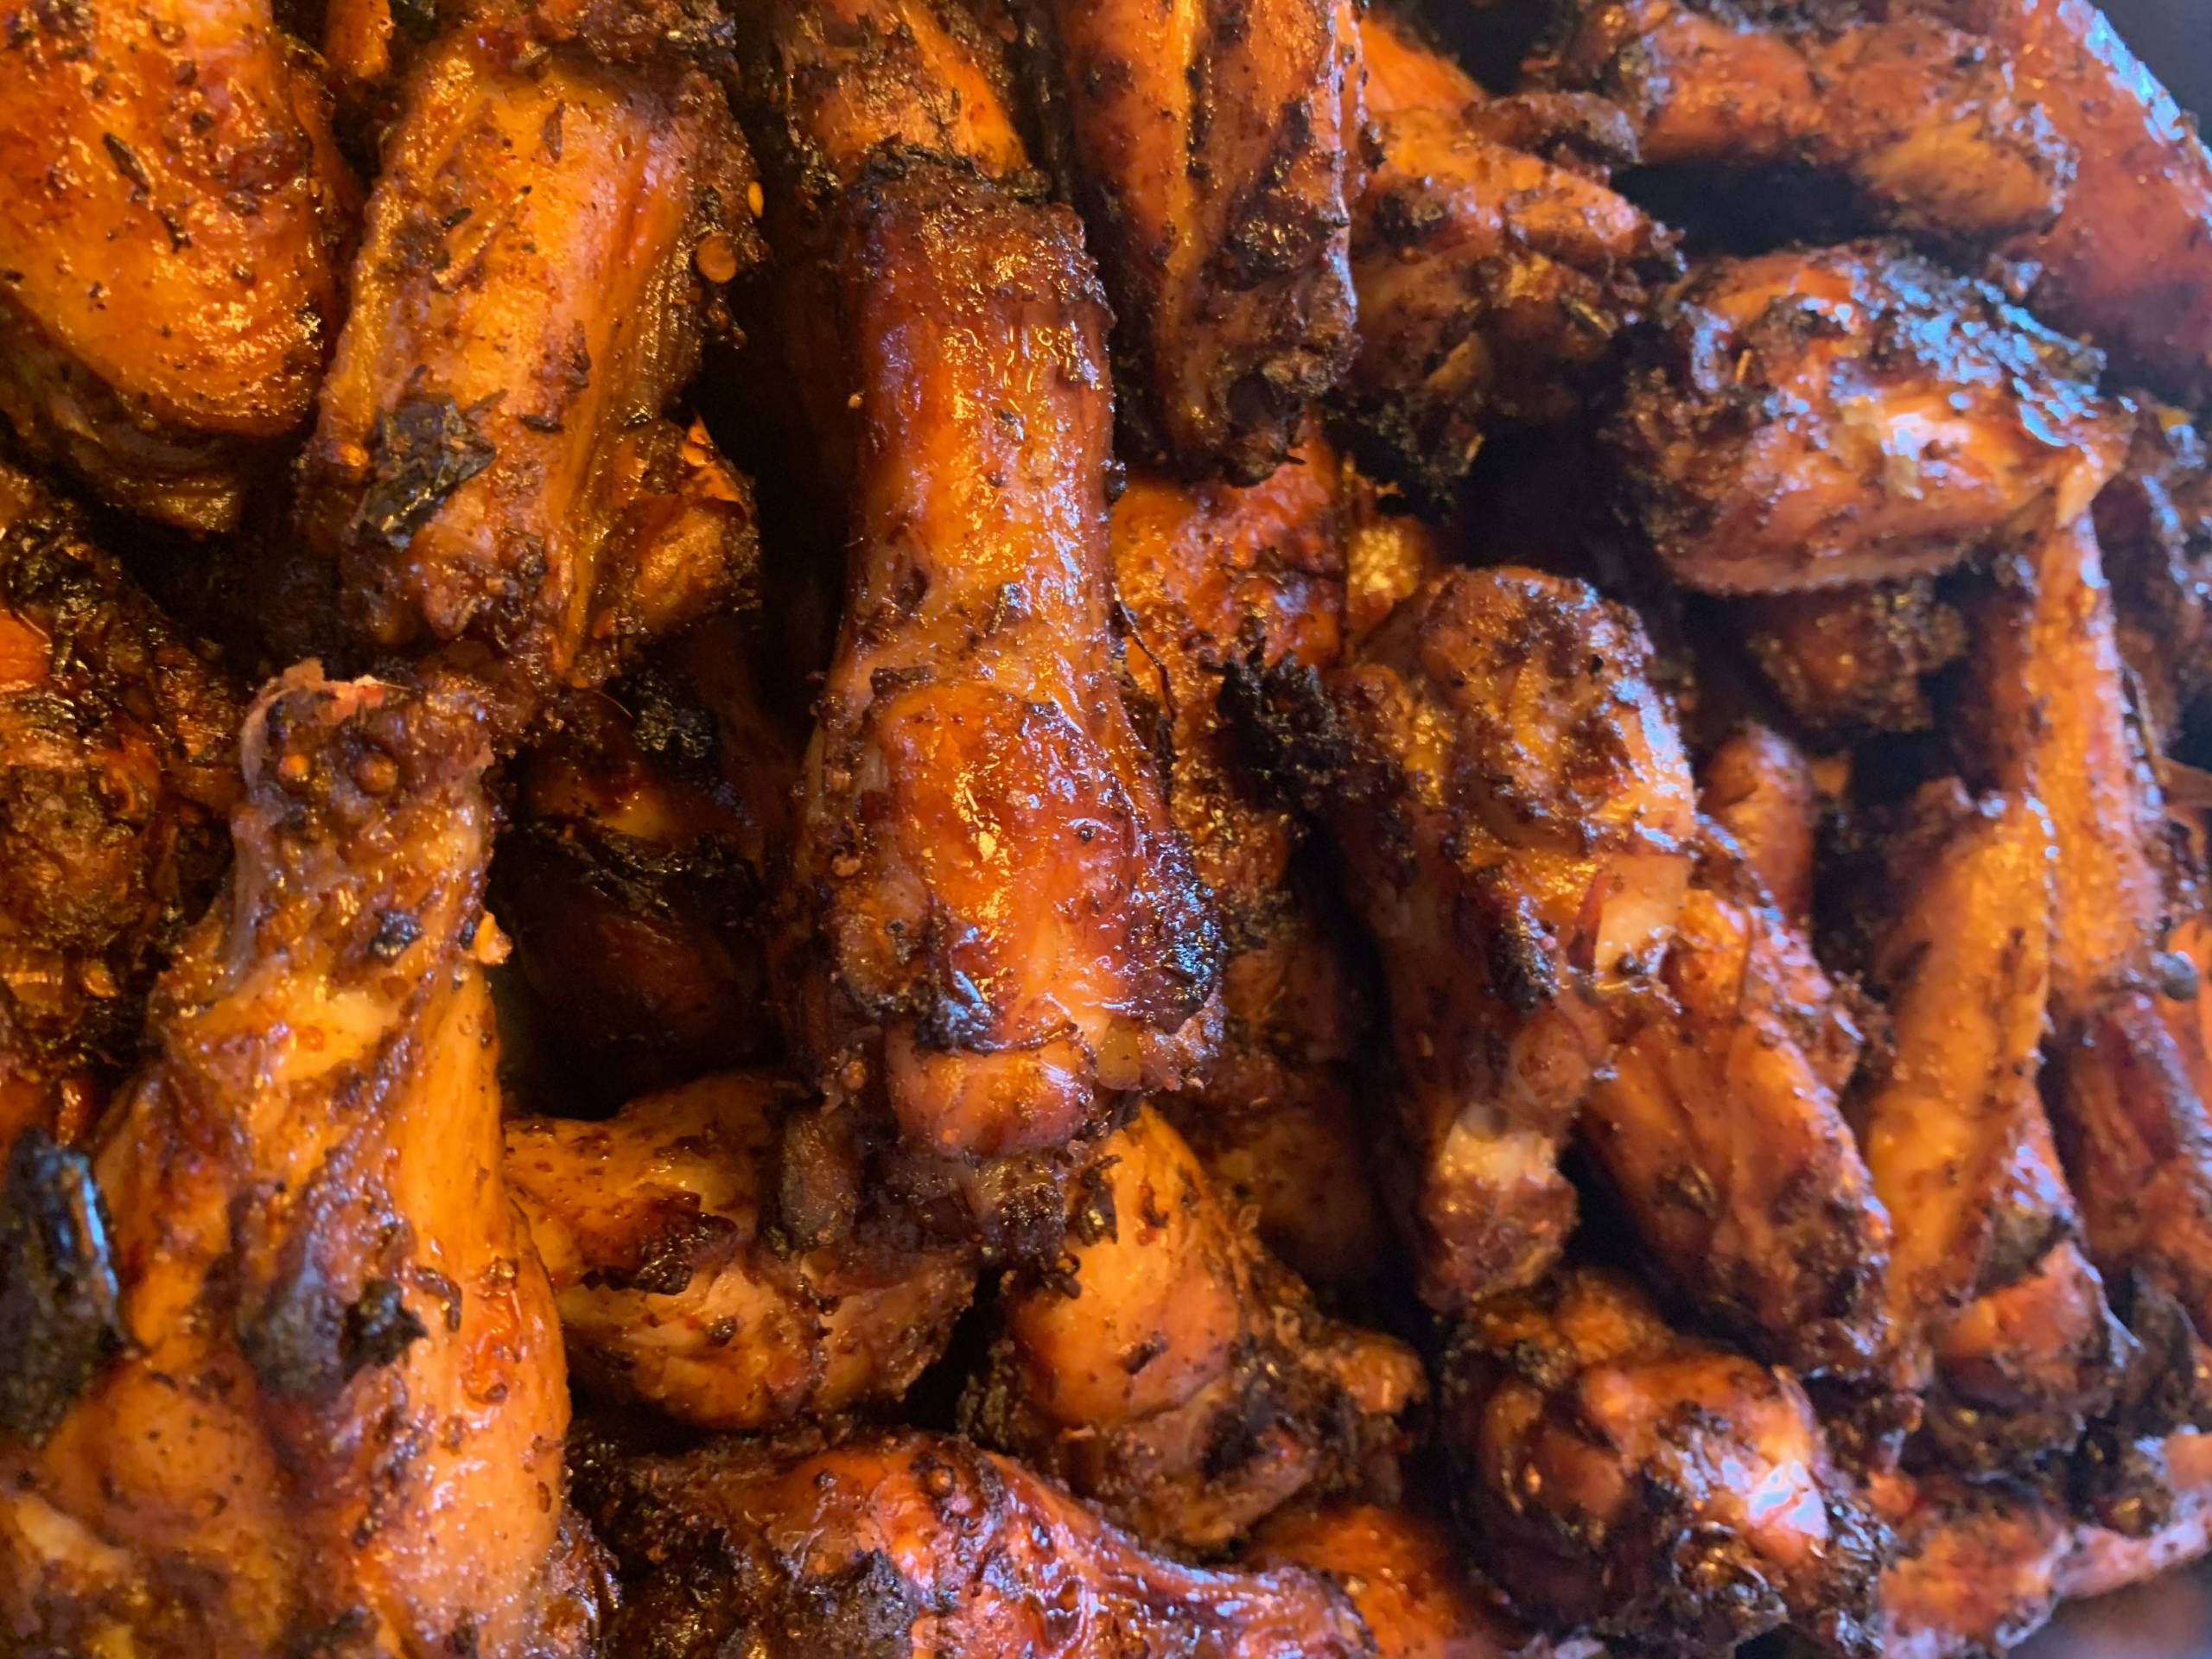 Close-up of a tray of red, spice-stained chicken wings with a hint of charring.